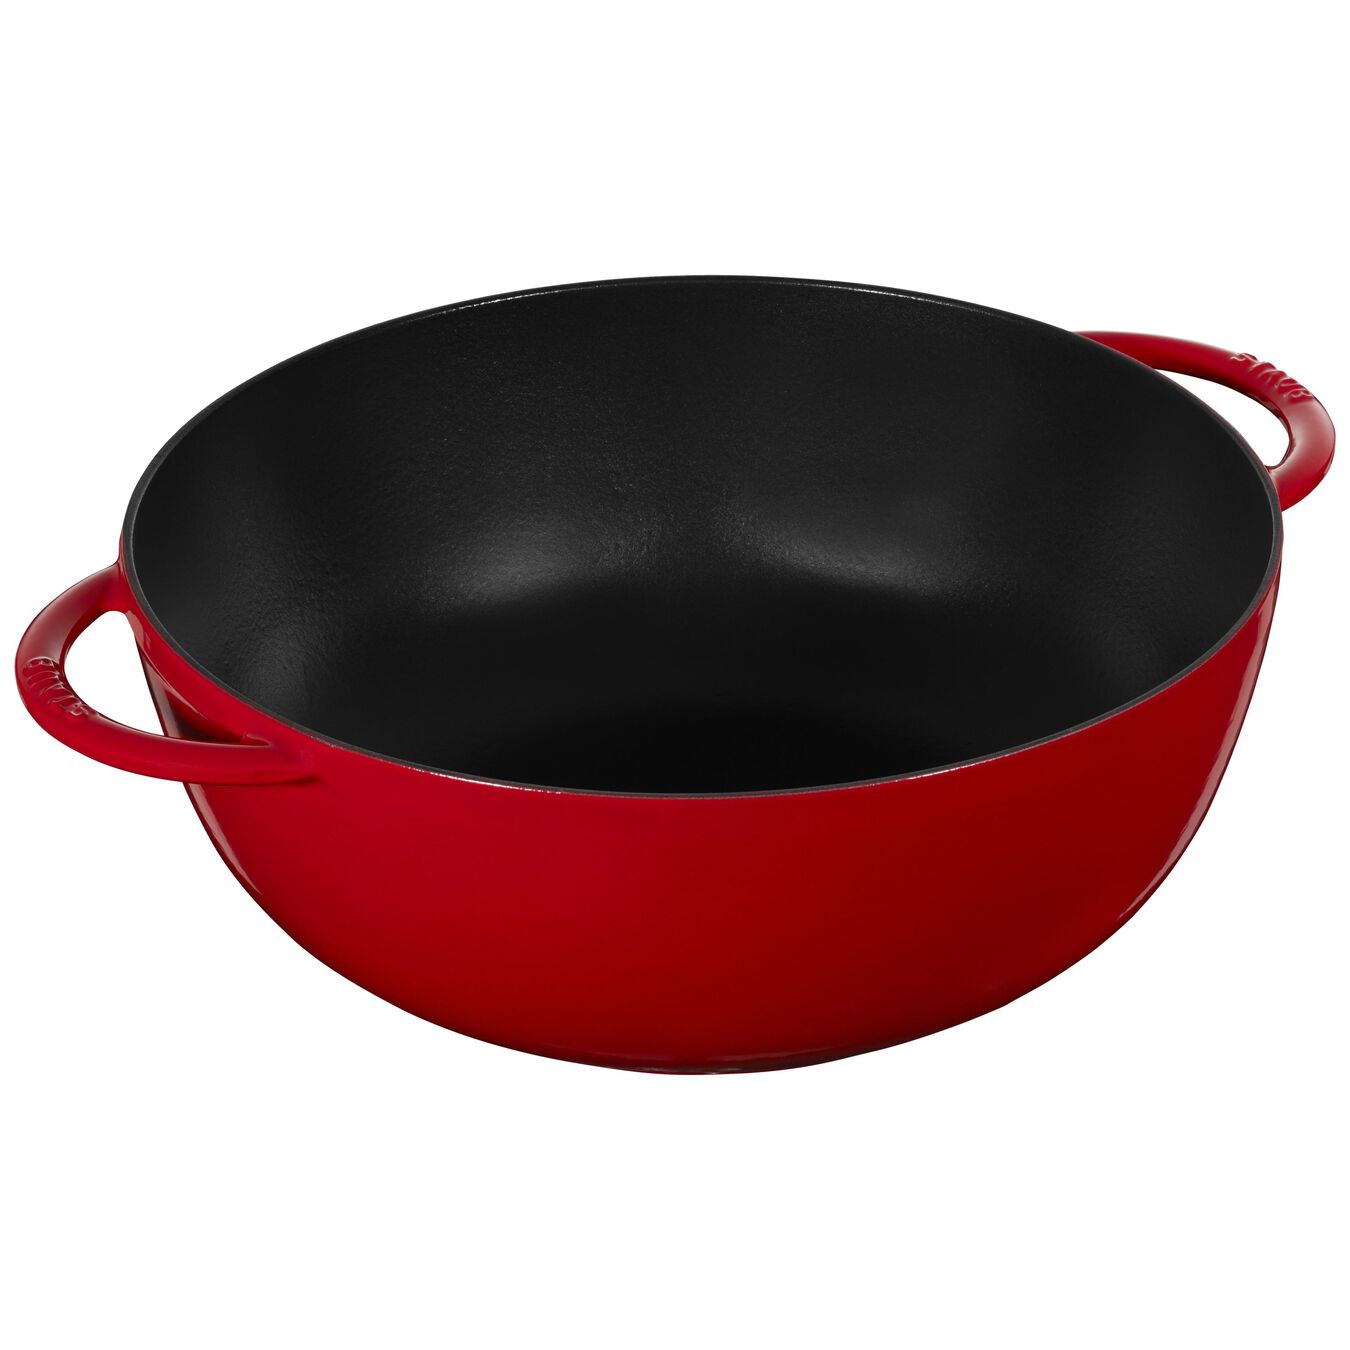 32 cm / 12.5 inch cast iron Wok, cherry - Visual Imperfections,,large 2